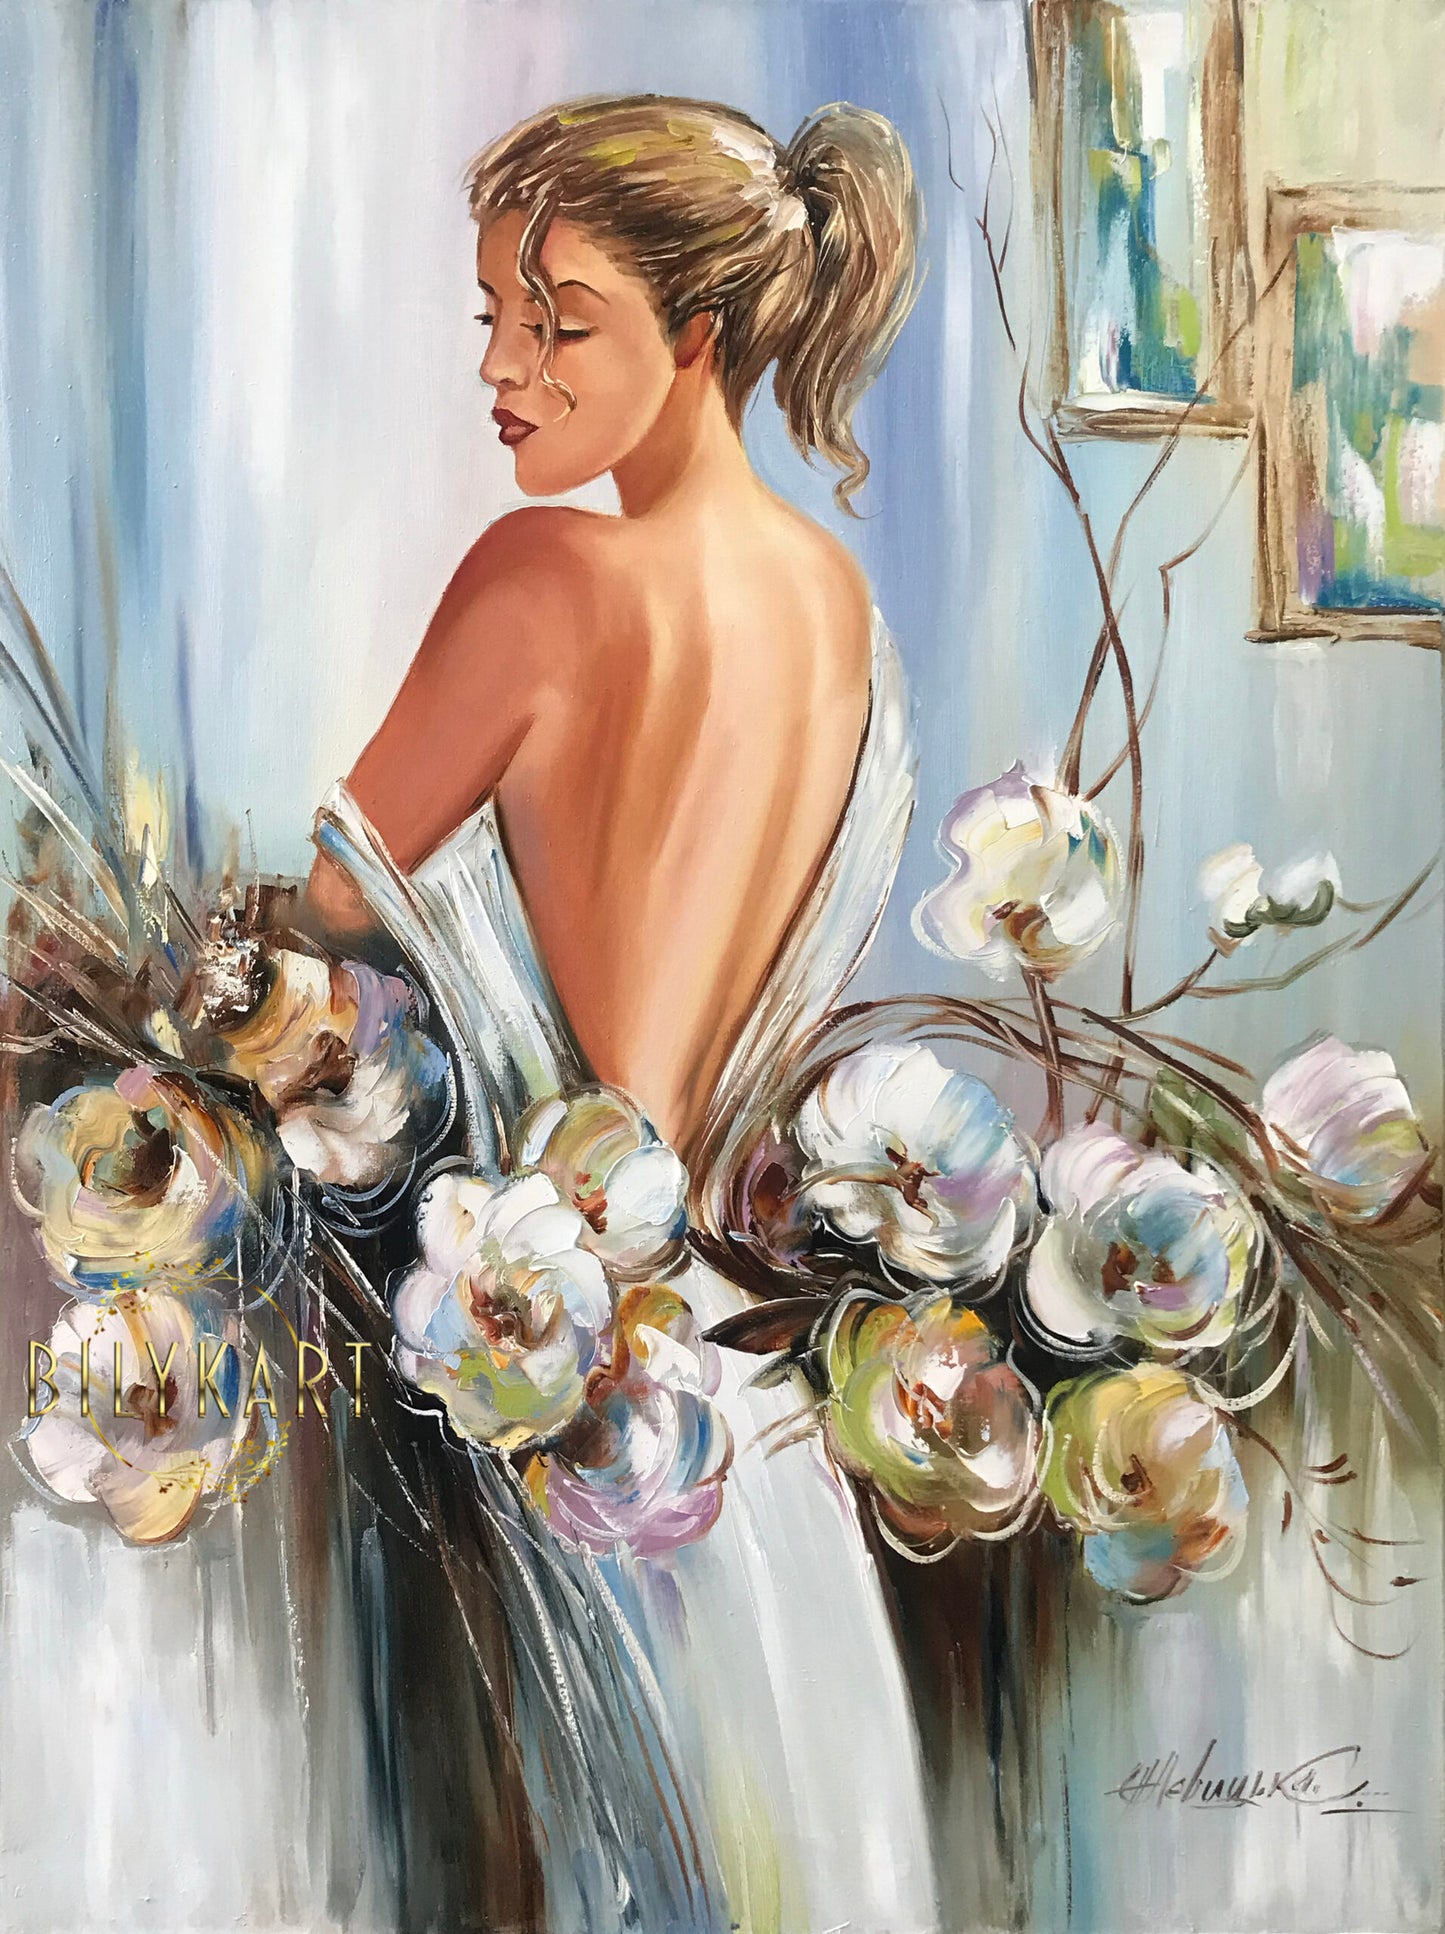 Elegant Woman in White Dress Painting on Canvas Elegant Wall Art for Bedroom Flower Girl with Orchids Oil Painting Original Woman Back Painting